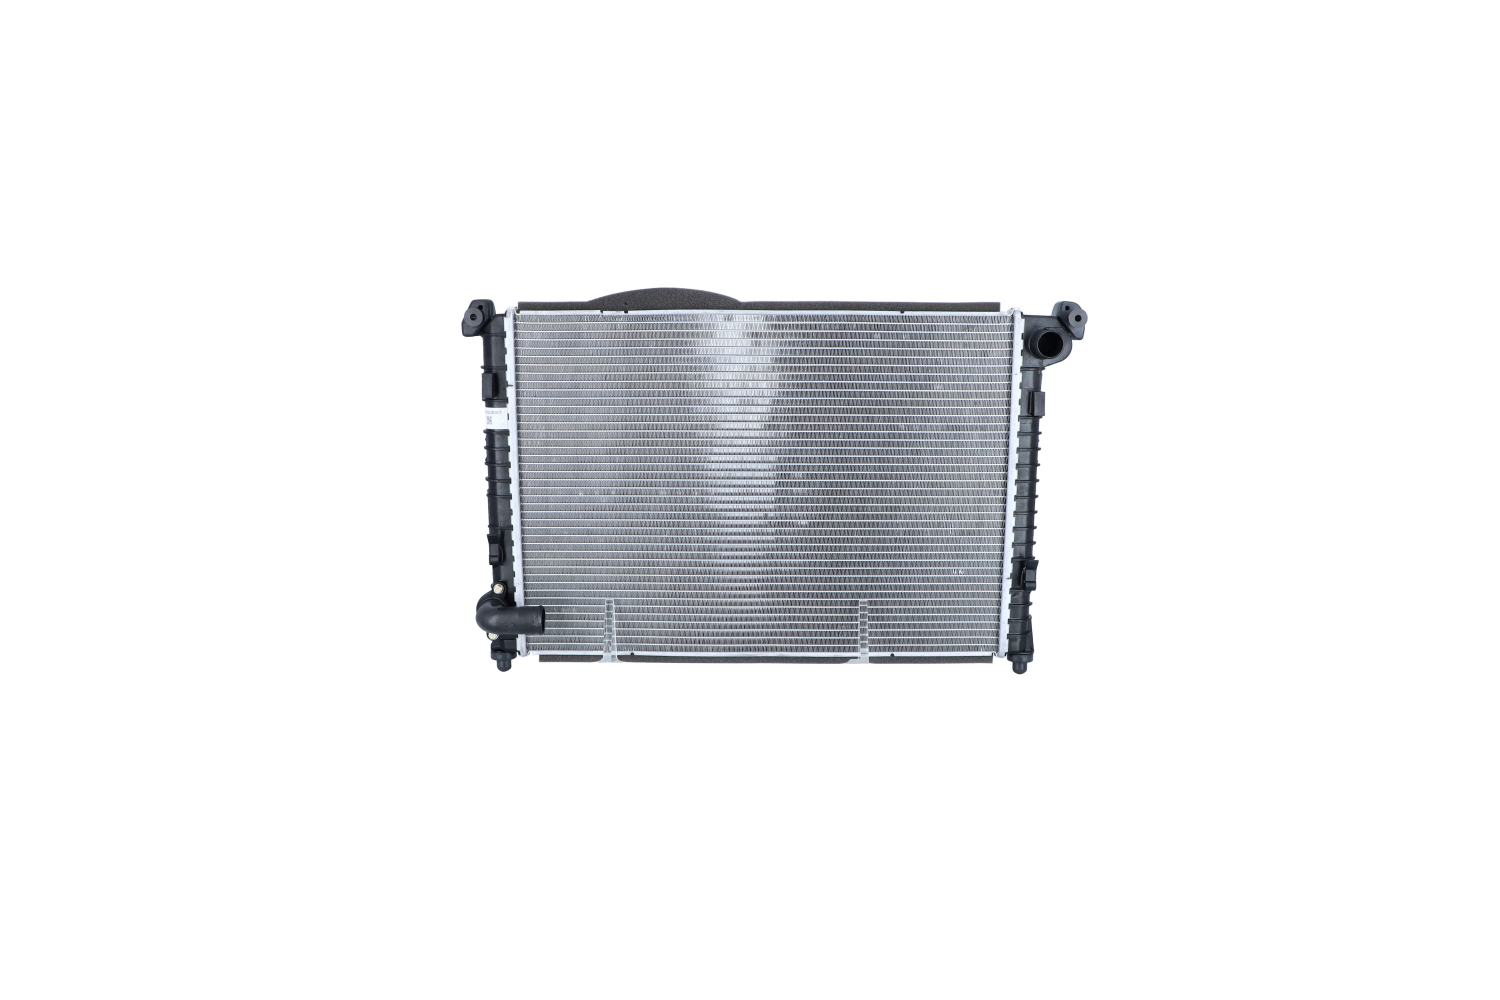 NRF 55338 Engine radiator Aluminium, 578 x 405 x 29 mm, with mounting parts, Brazed cooling fins